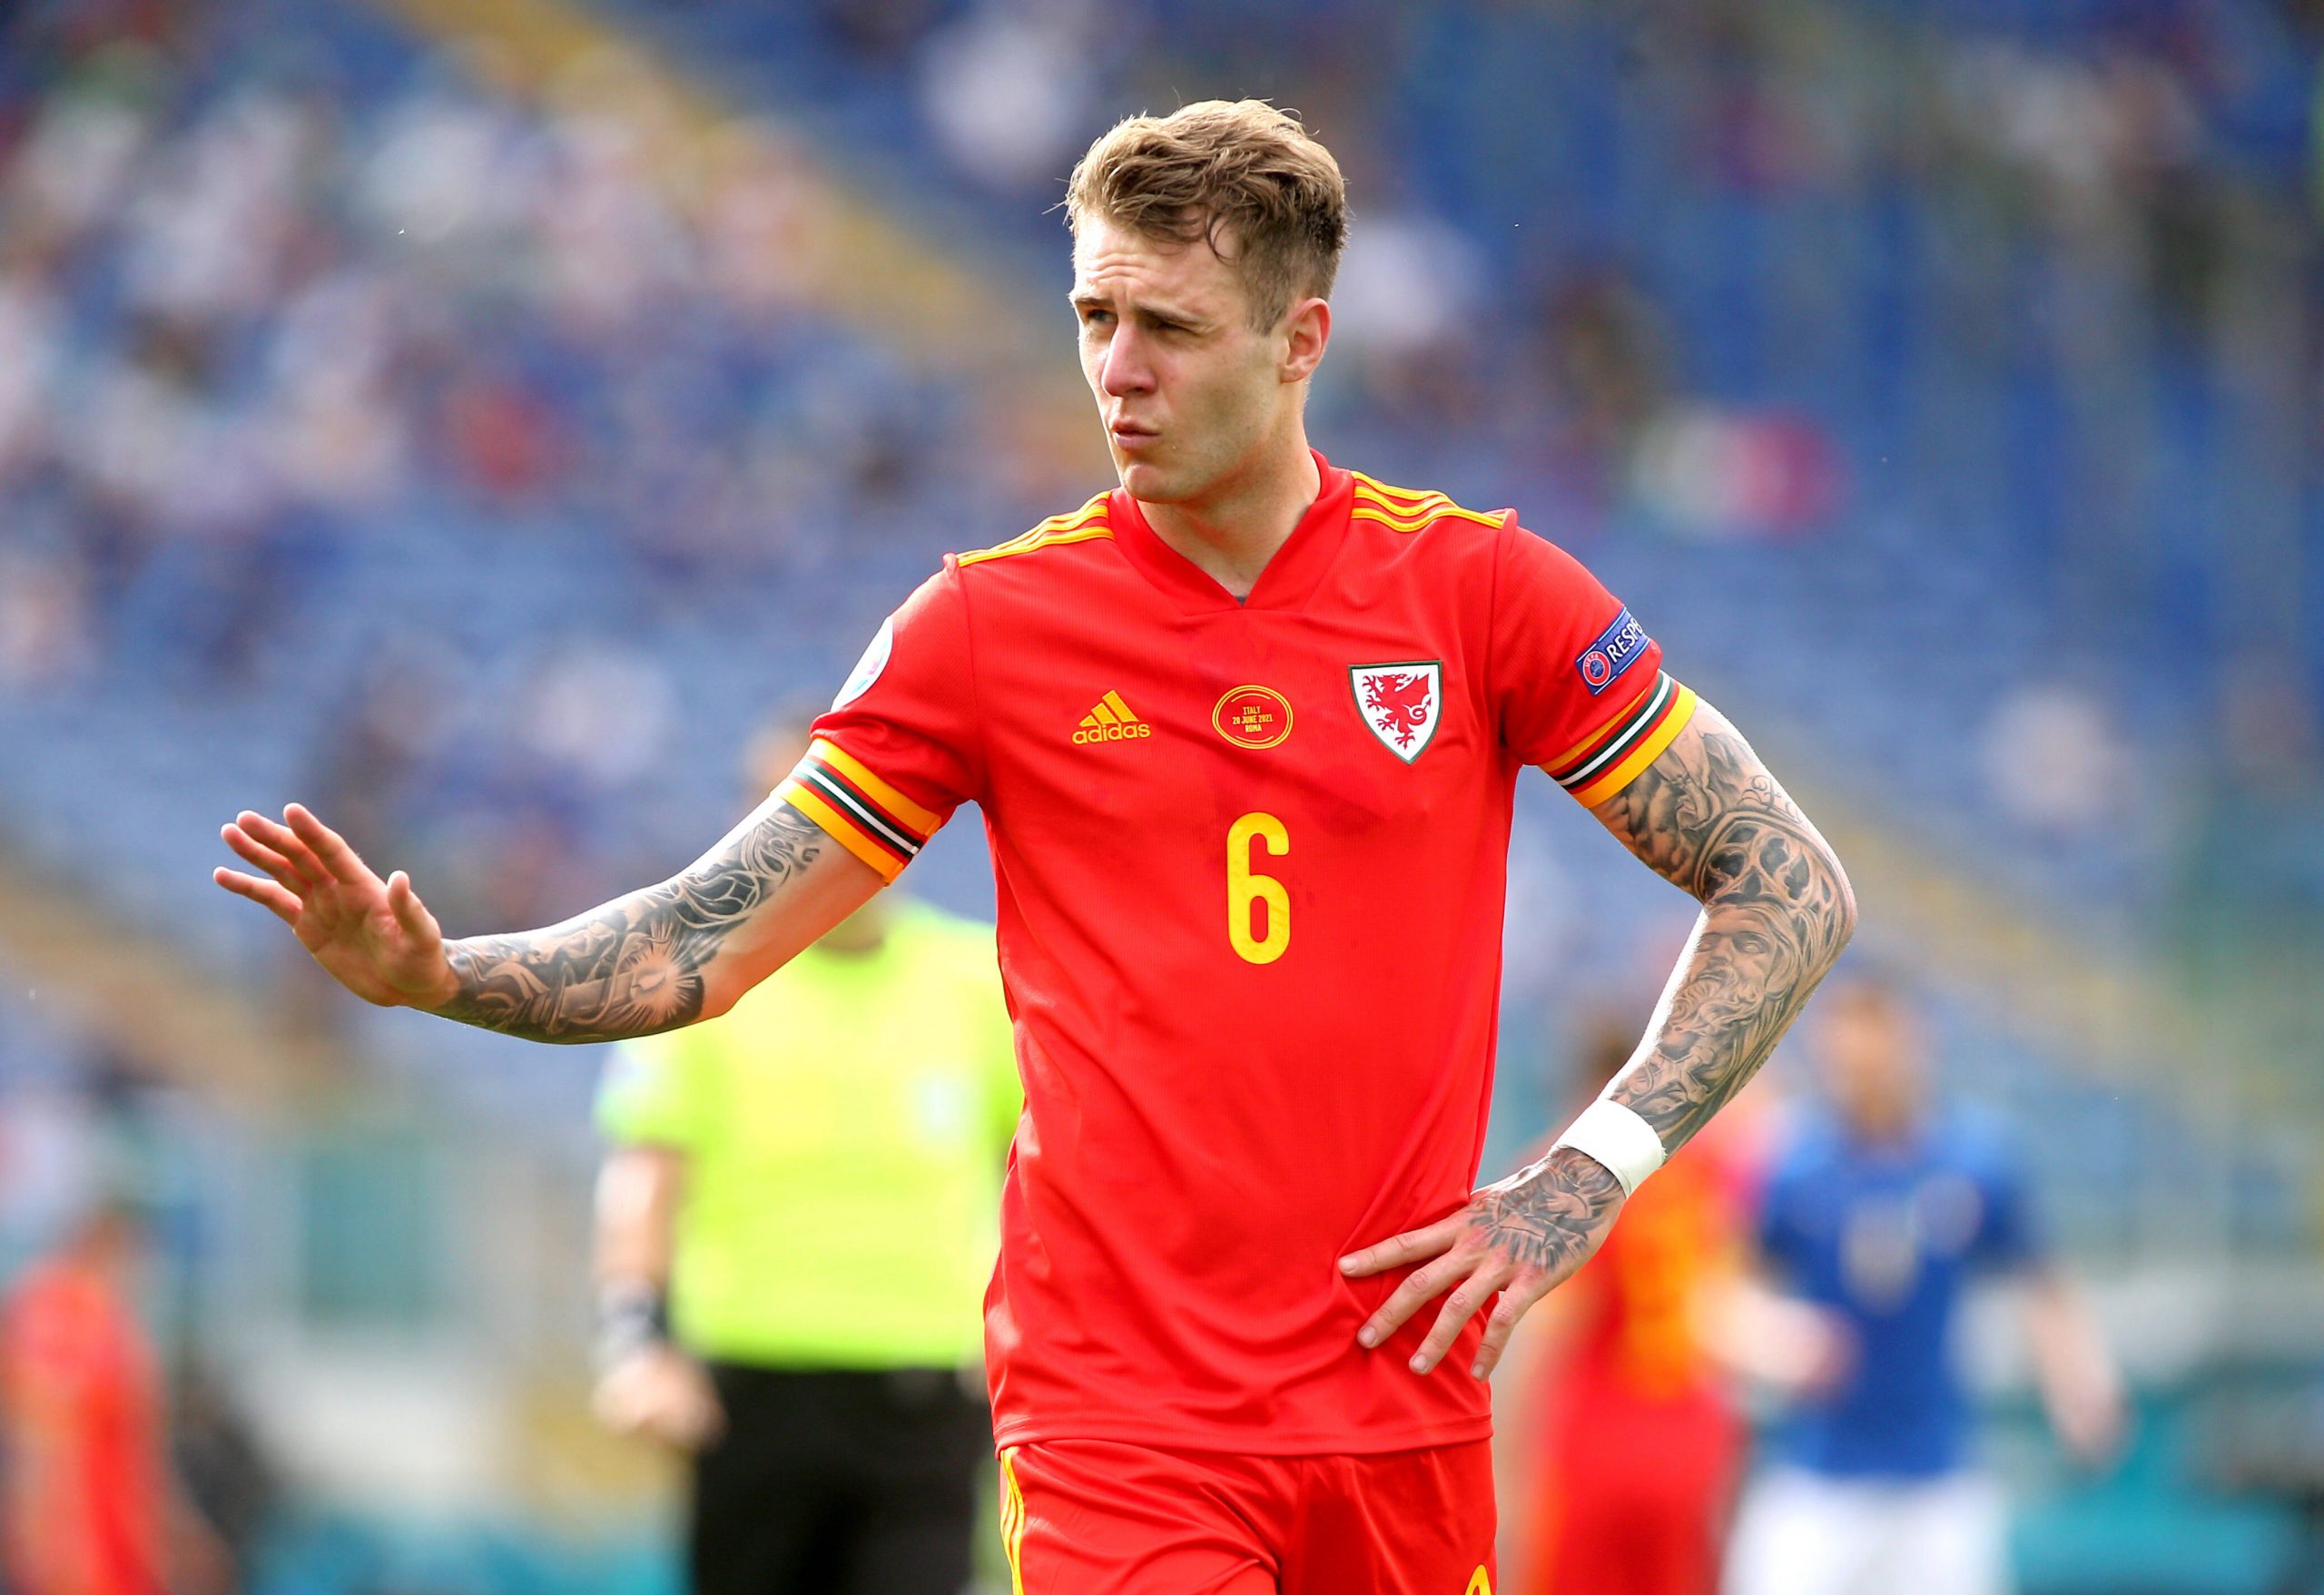 Tottenham Hotspur and Wales defender, Joe Rodon, is the subject of transfer interest from Bright and Hove Albion, who see him as a replacement for Ben White.